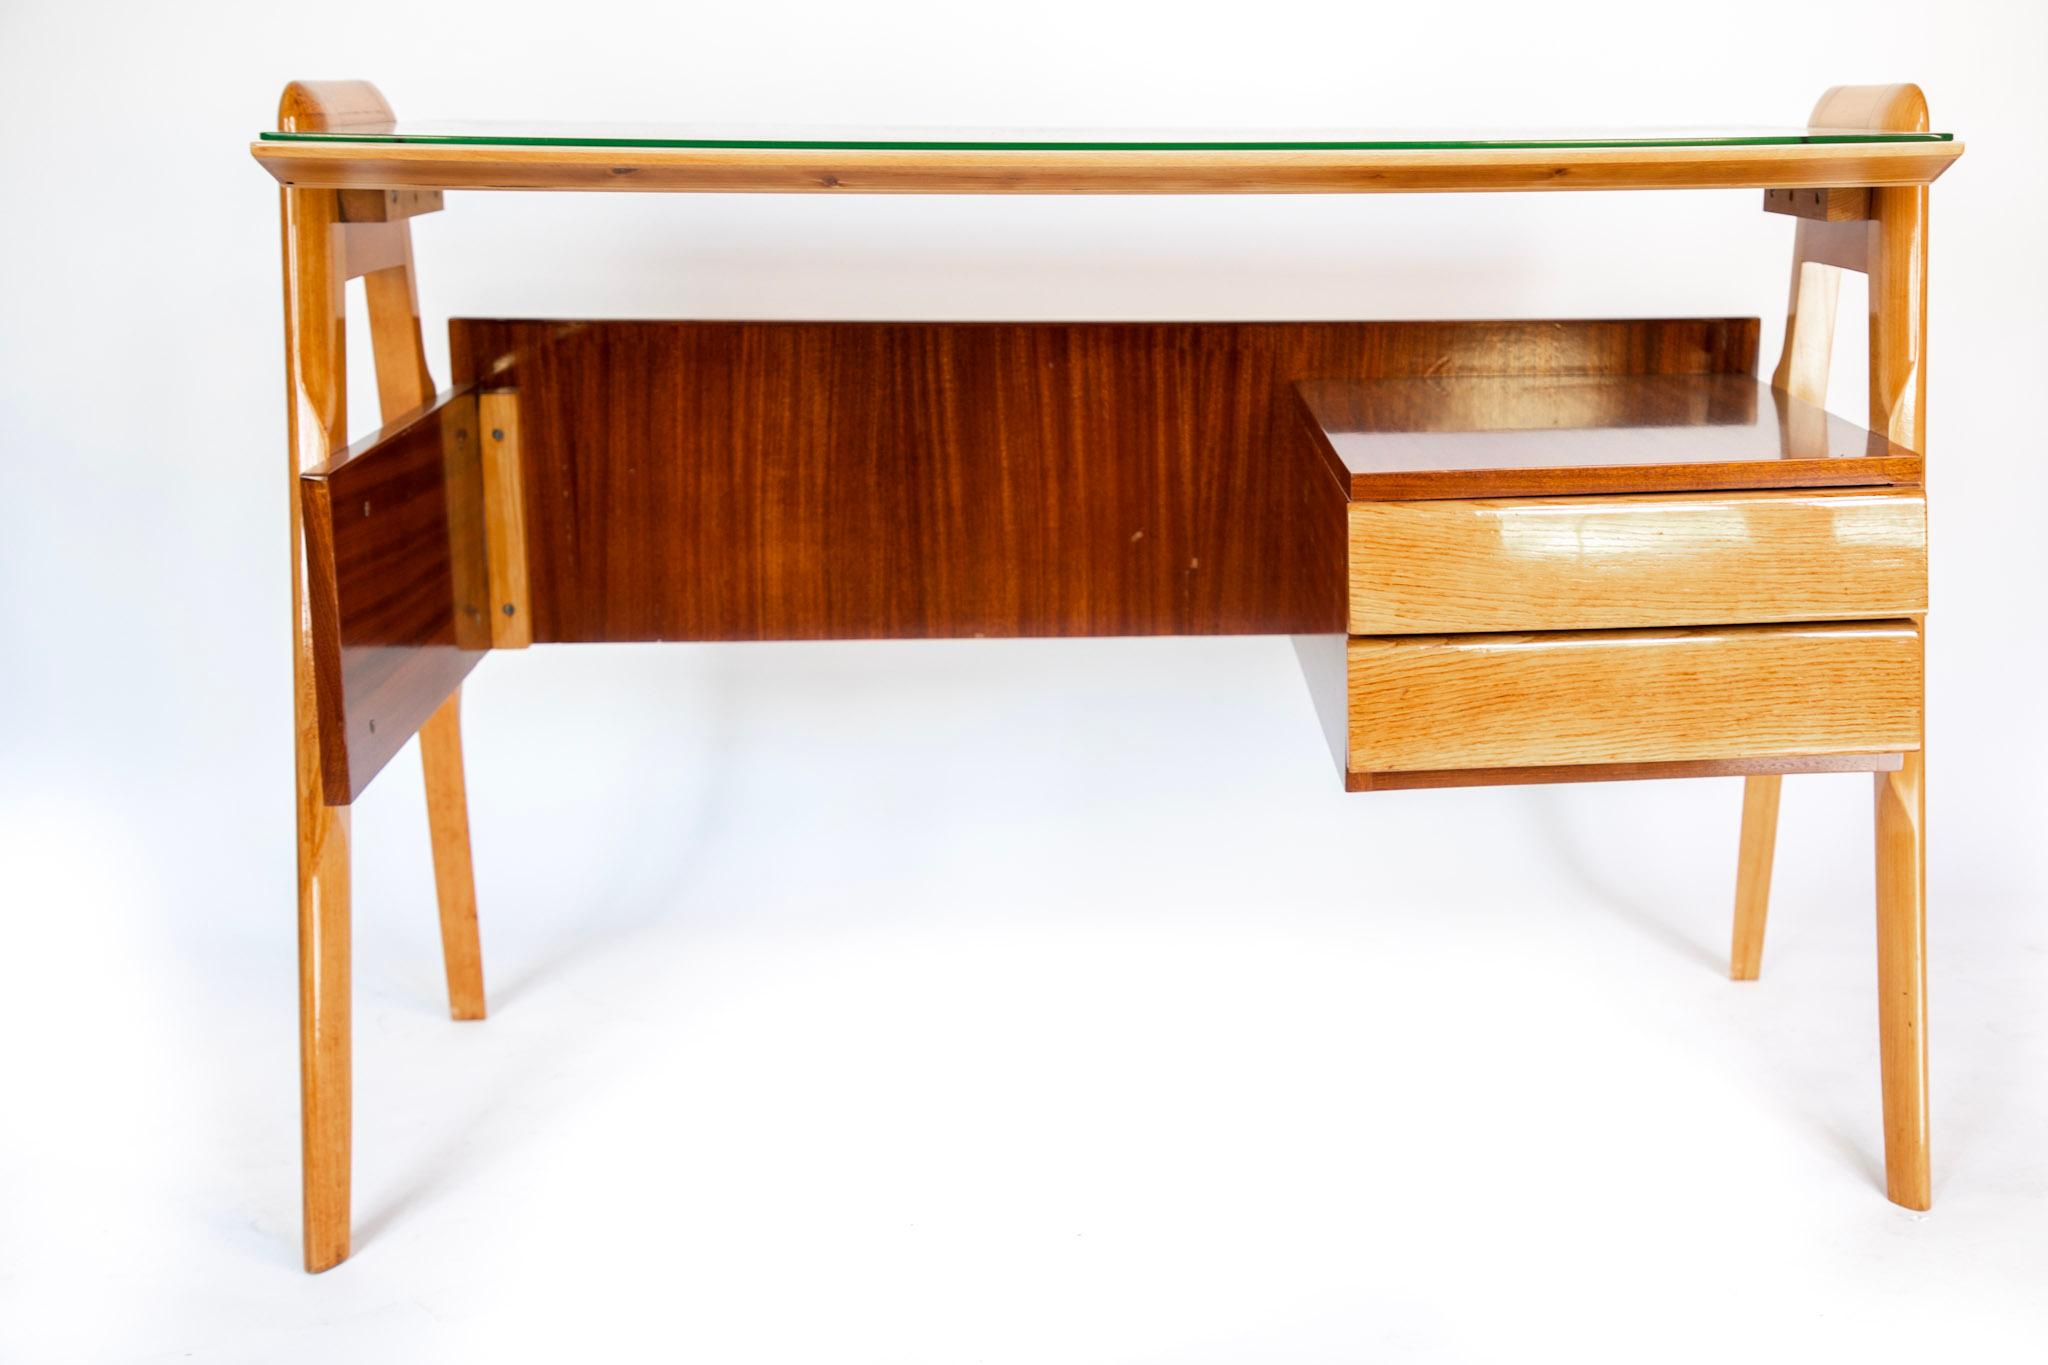 Mid Century Modern Wooden Desk by Vittorio Dassi, Layer of Glass, Italy 1950s.

Wonderful desk by the Italian designer Vittorio Dassi in a minimal rational shape. Elegant in design without losing the functional quality. Manufactured by Dassi Mobili